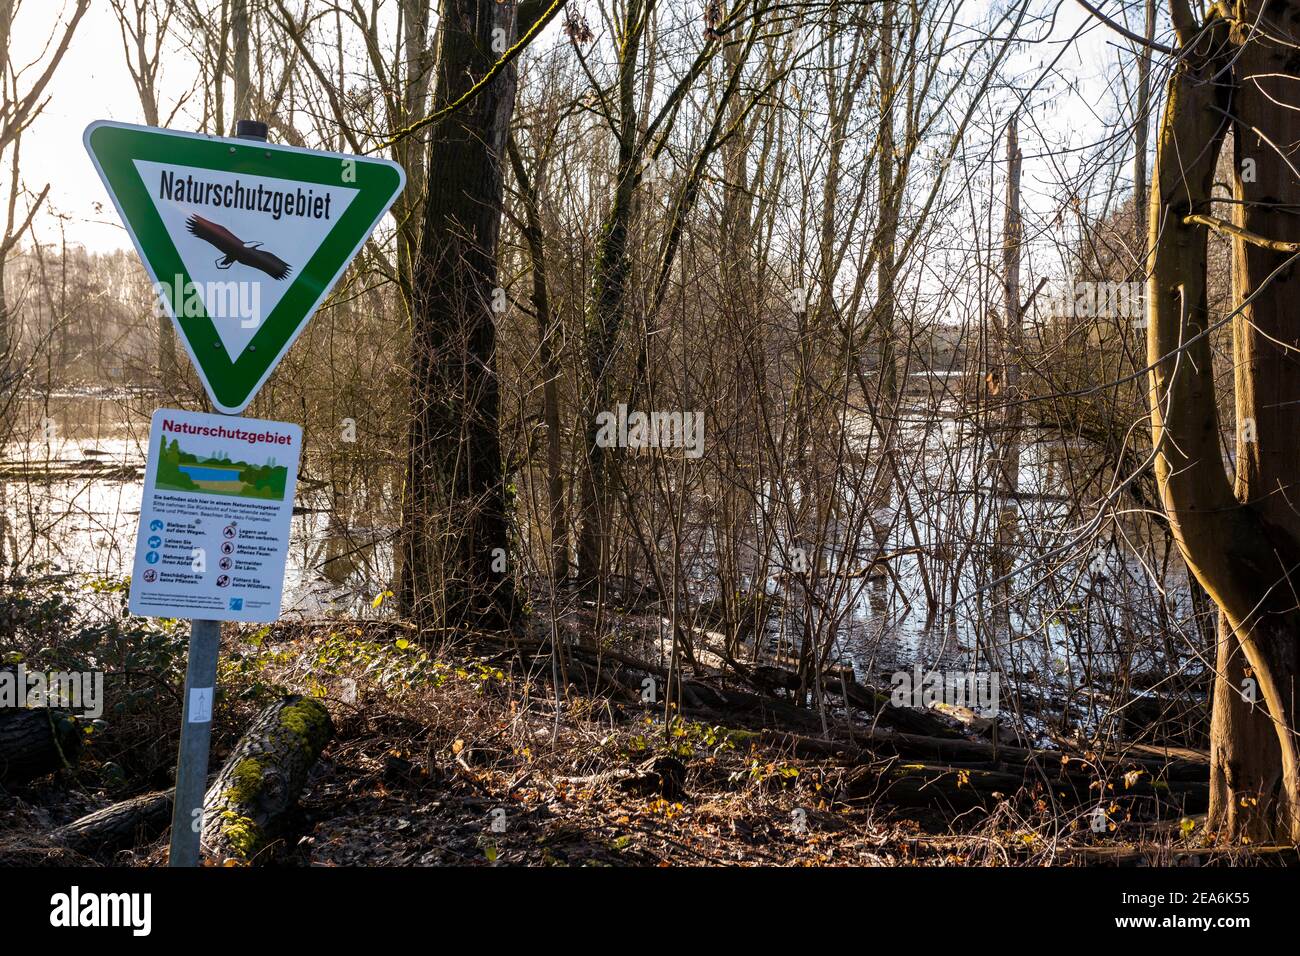 Flood of the Rhine in the Urdenbacher Kampe with its alluvial forests a untouched nature and landscape protection area in the south of Dusseldorf Stock Photo